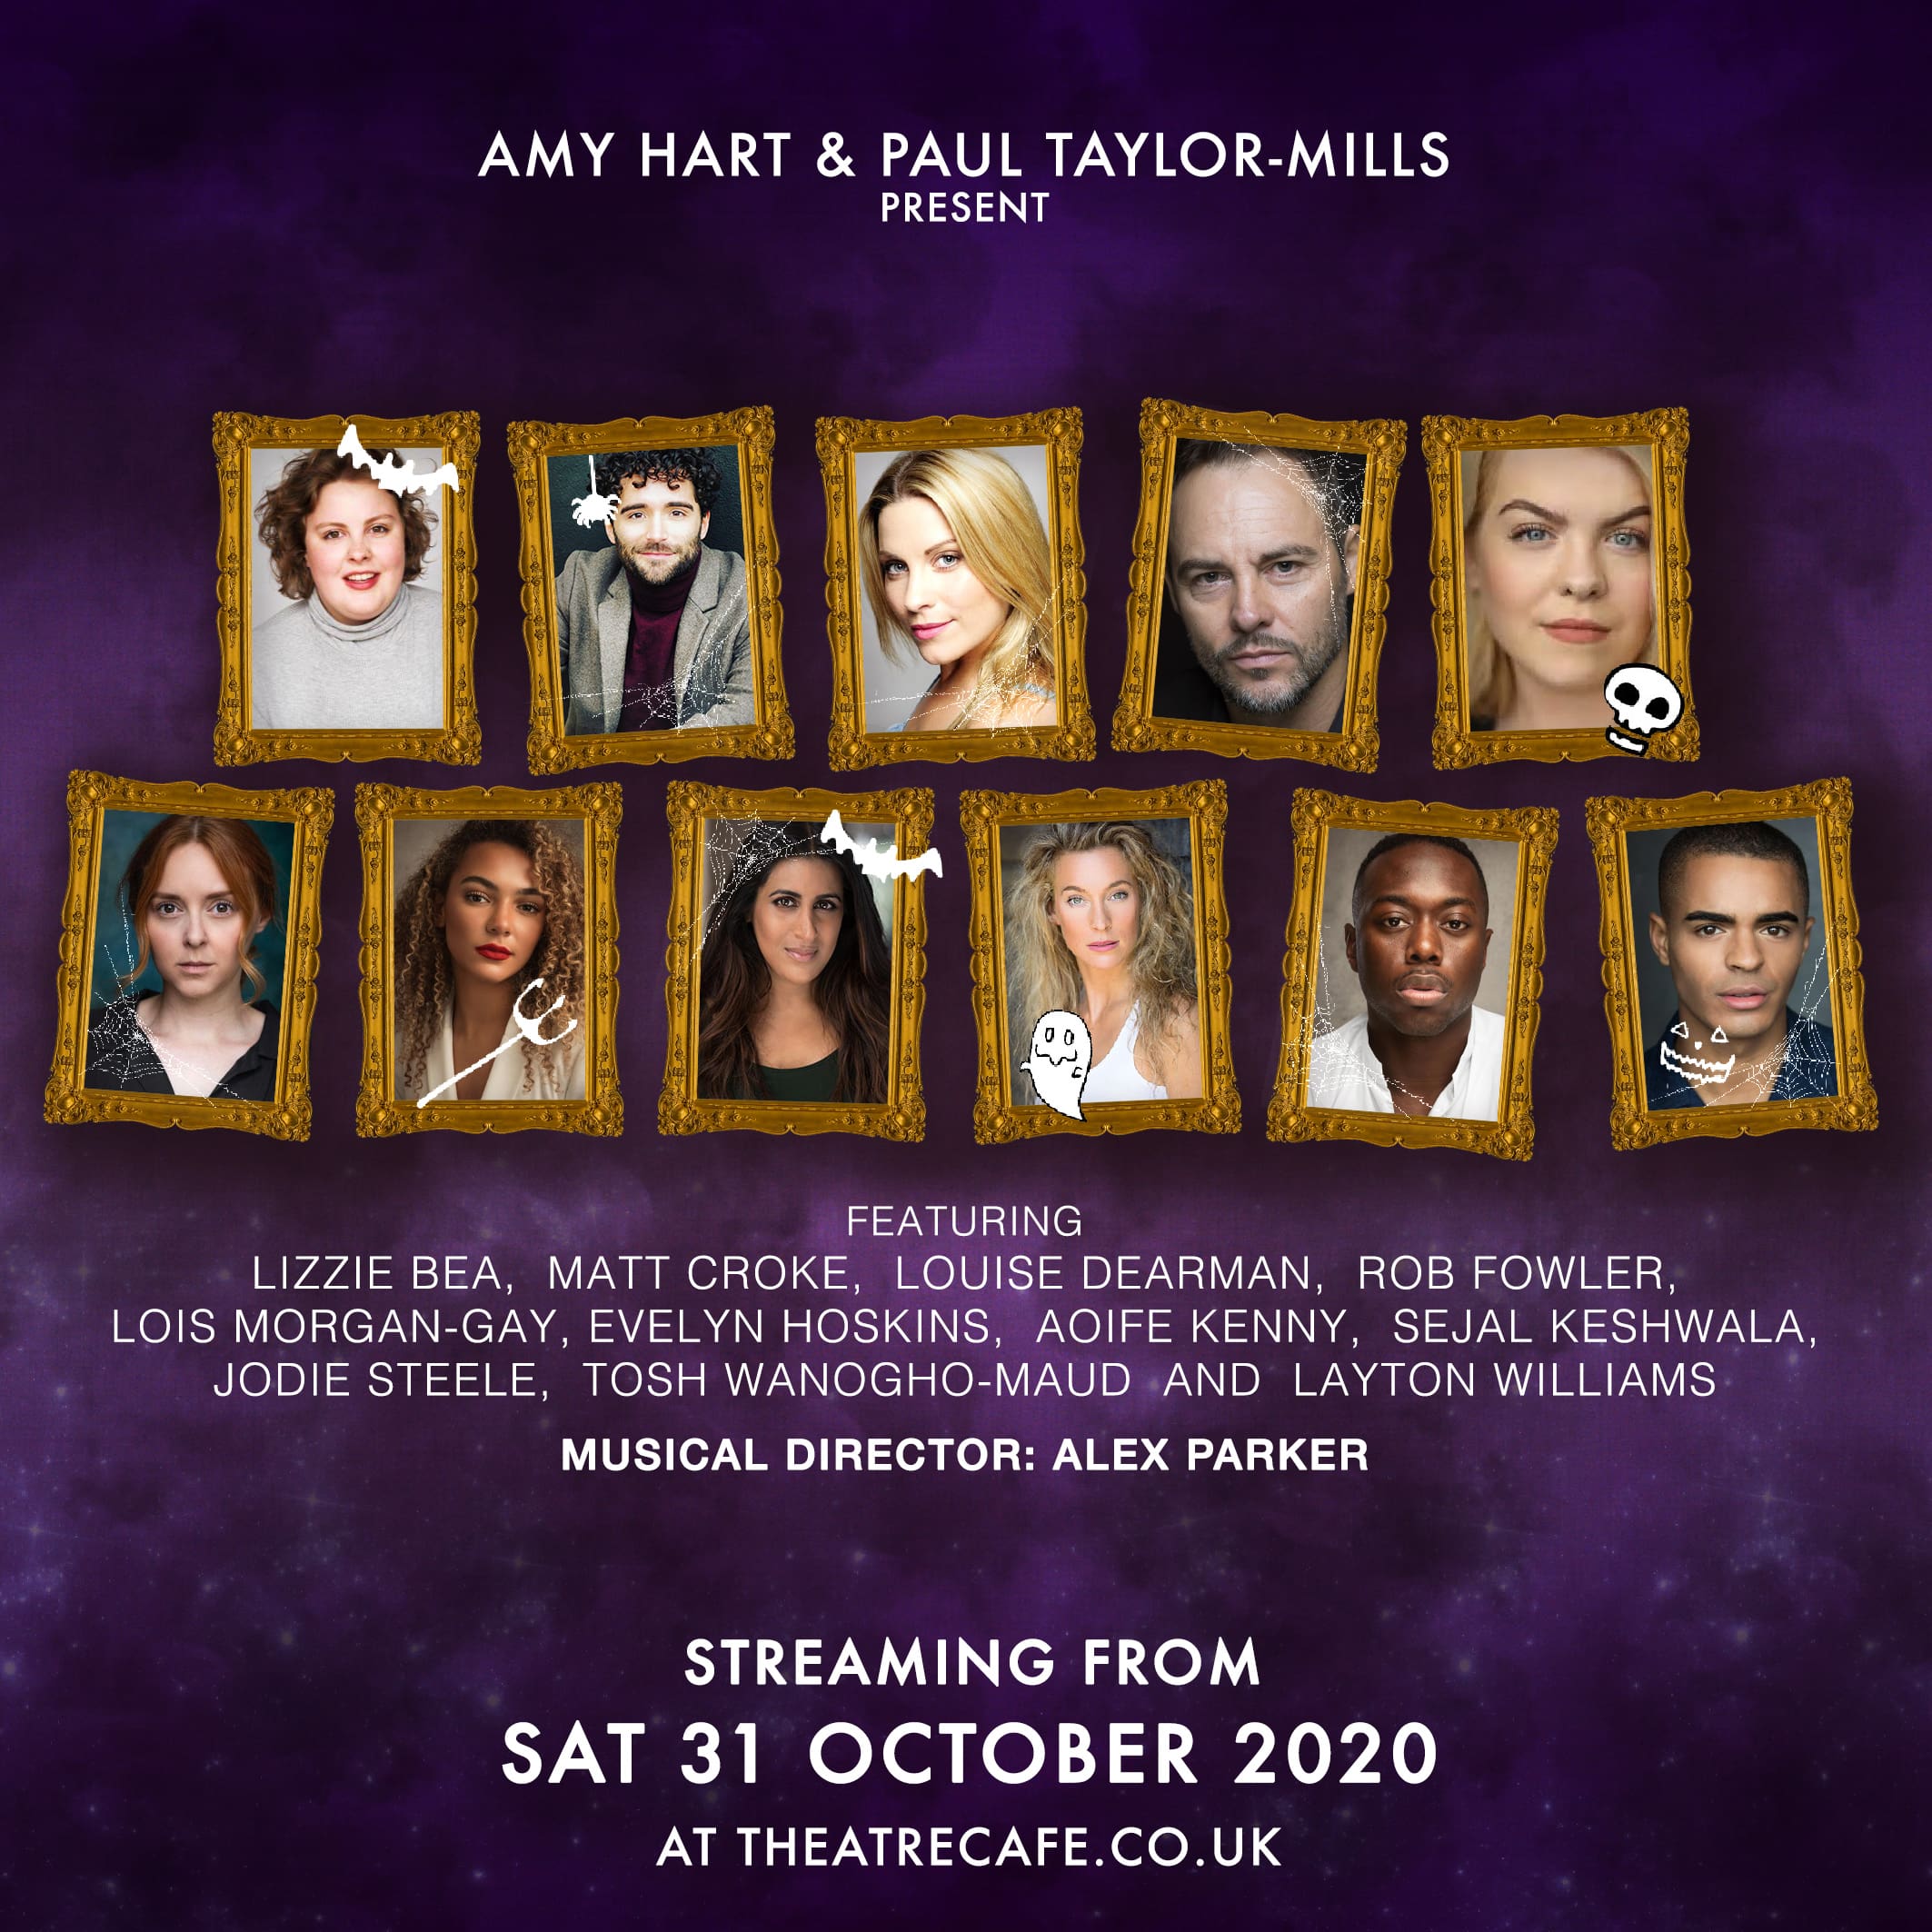 NEWS: AMY HART AND PAUL TAYLOR-MILLS PRESENT  I PUT A SPELL ON YOU STREAMING FROM 31 OCTOBER 2020